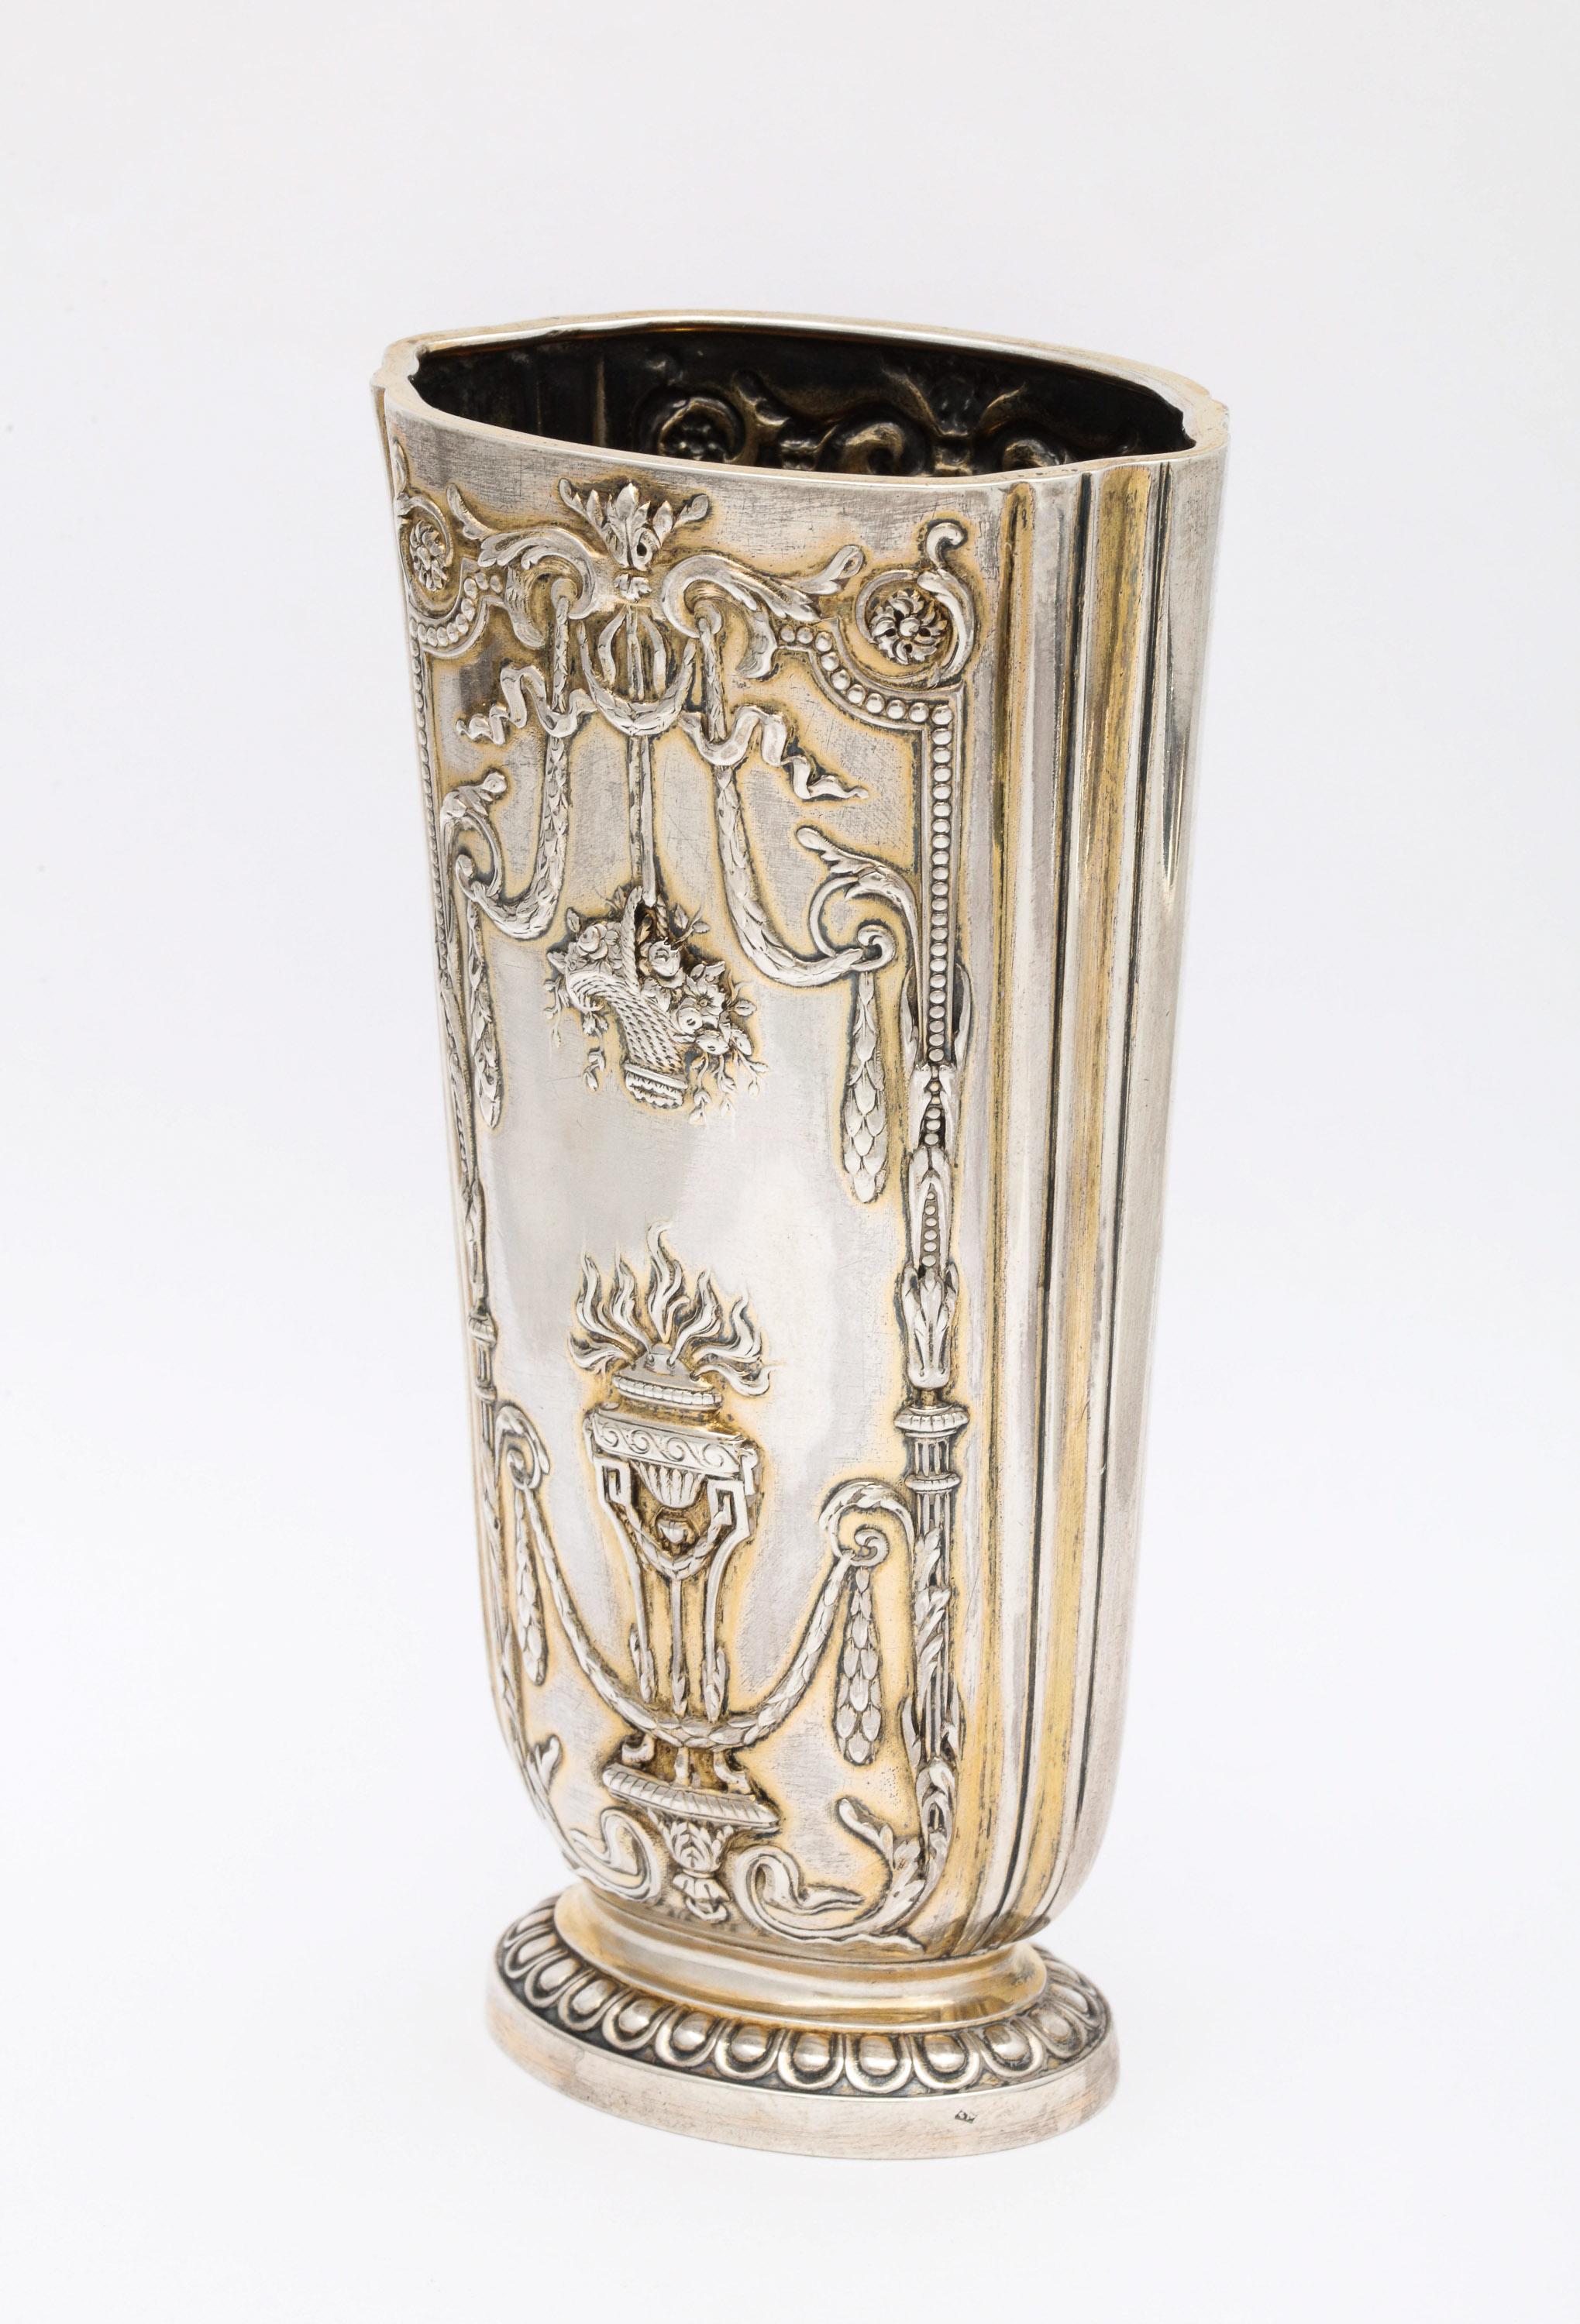 Edwardian, sterling silver-gilt vase, Paris, circa 1905. Decorated with baskets and torchieres. Measures: 5 1/2 inches high x 2 3/4 inches wide (at widest point) x 2 inches deep (at deepest point). Lightly gilded. Weighs 4.845 troy ounces. Dark